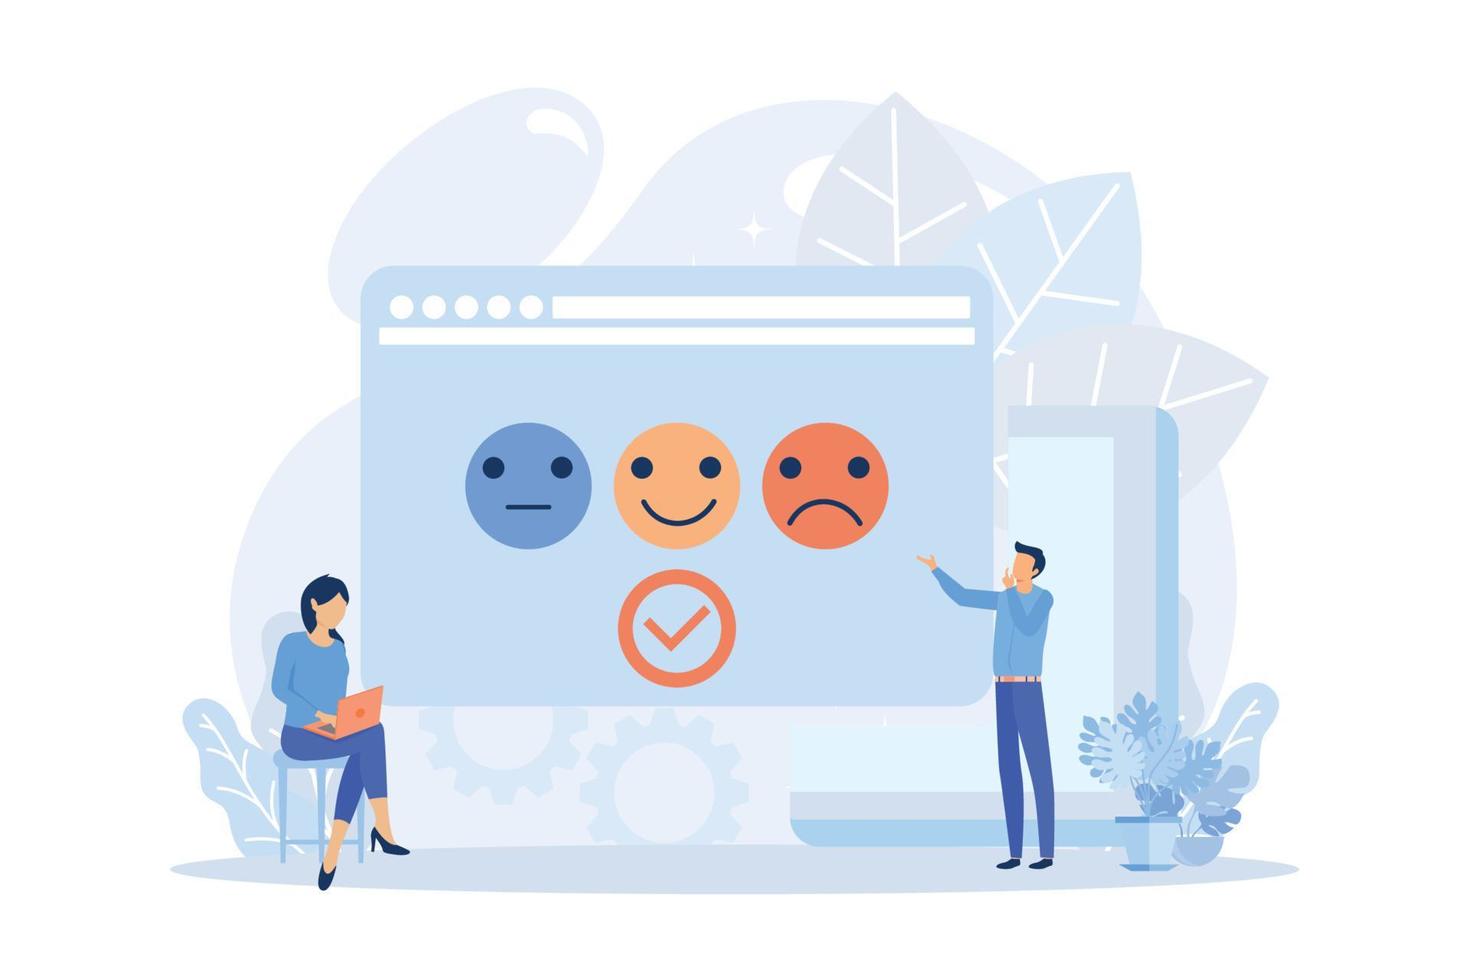 Feedback and review illustration. Characters giving positive feedback to helpdesk service. Rating scale and customer satisfaction concept. Flat vector illustration